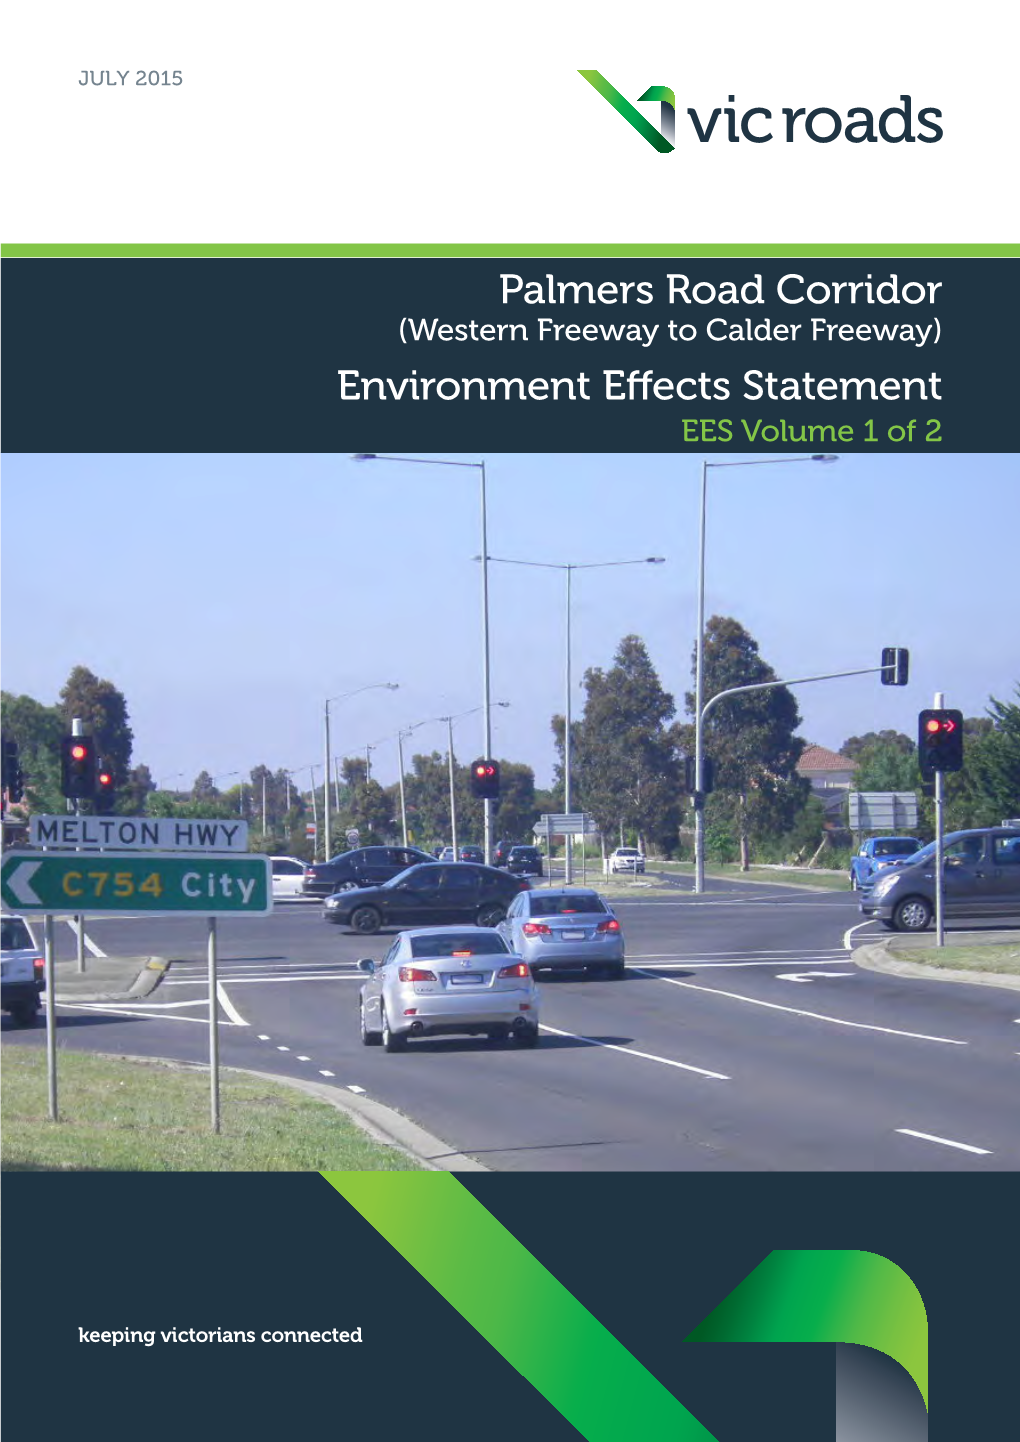 Palmers Road Corridor (Western Freeway to Calder Freeway) Environment Effects Statement EES Volume 1 of 2